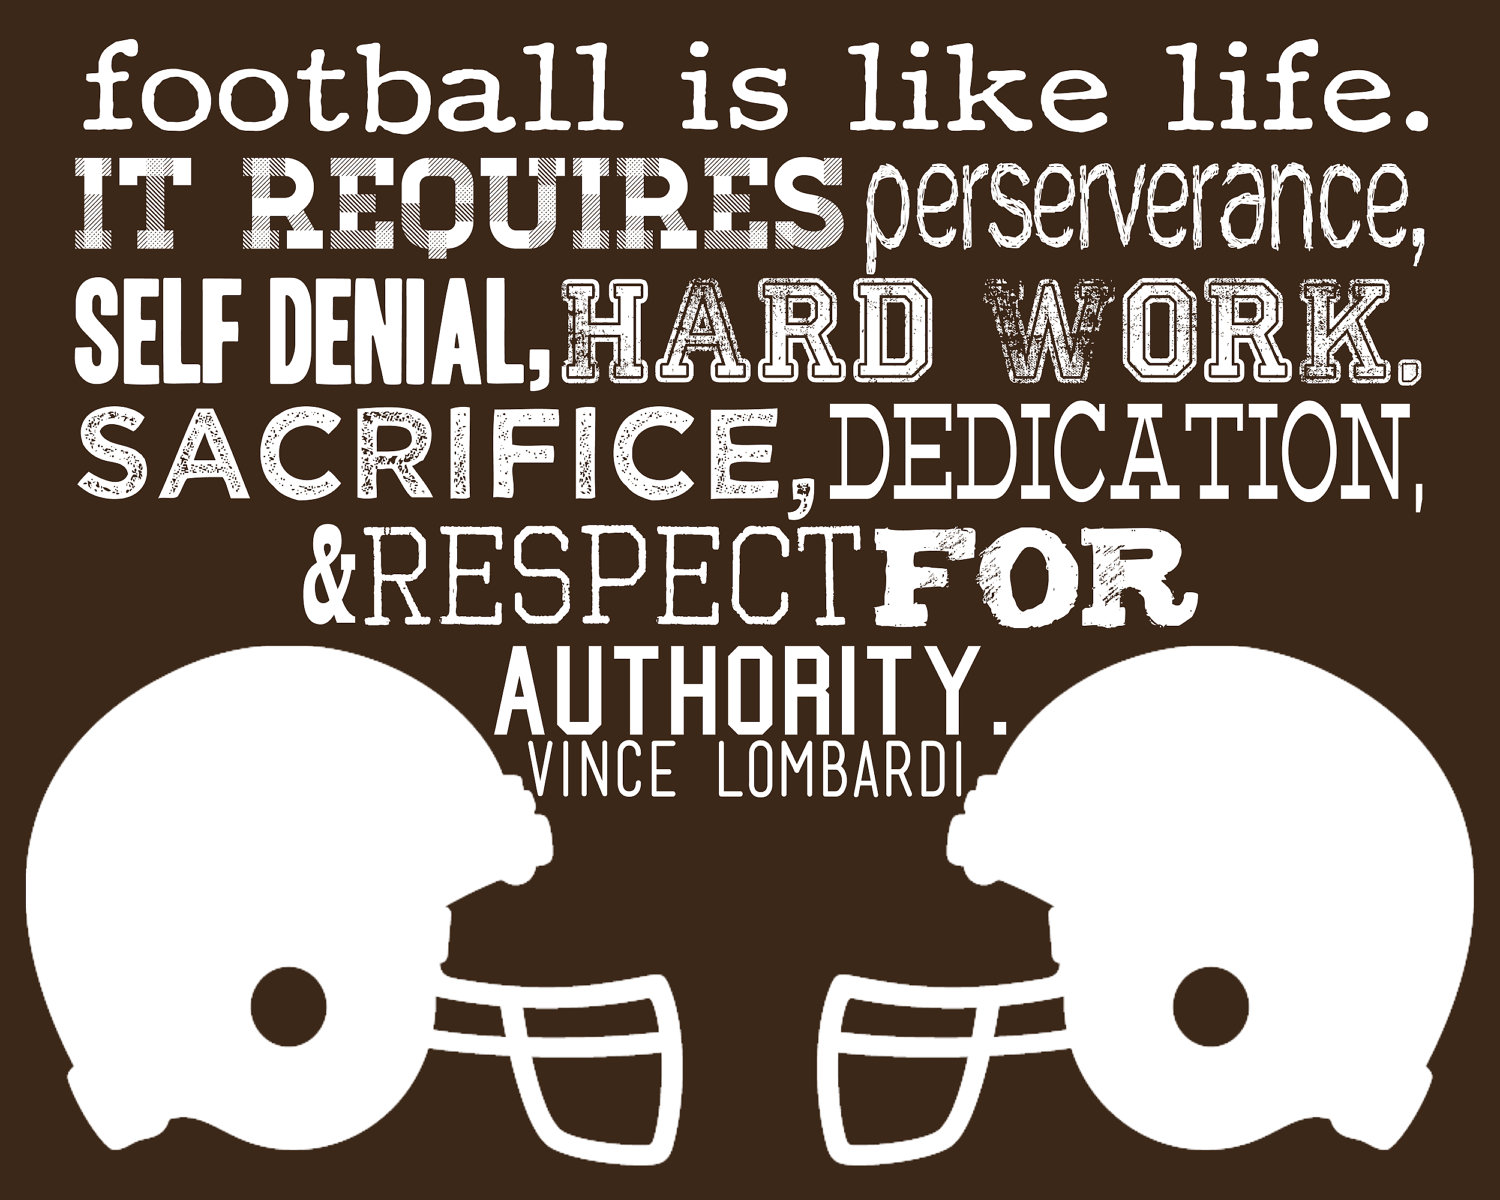 Football Season Quotes And Sayings. QuotesGram